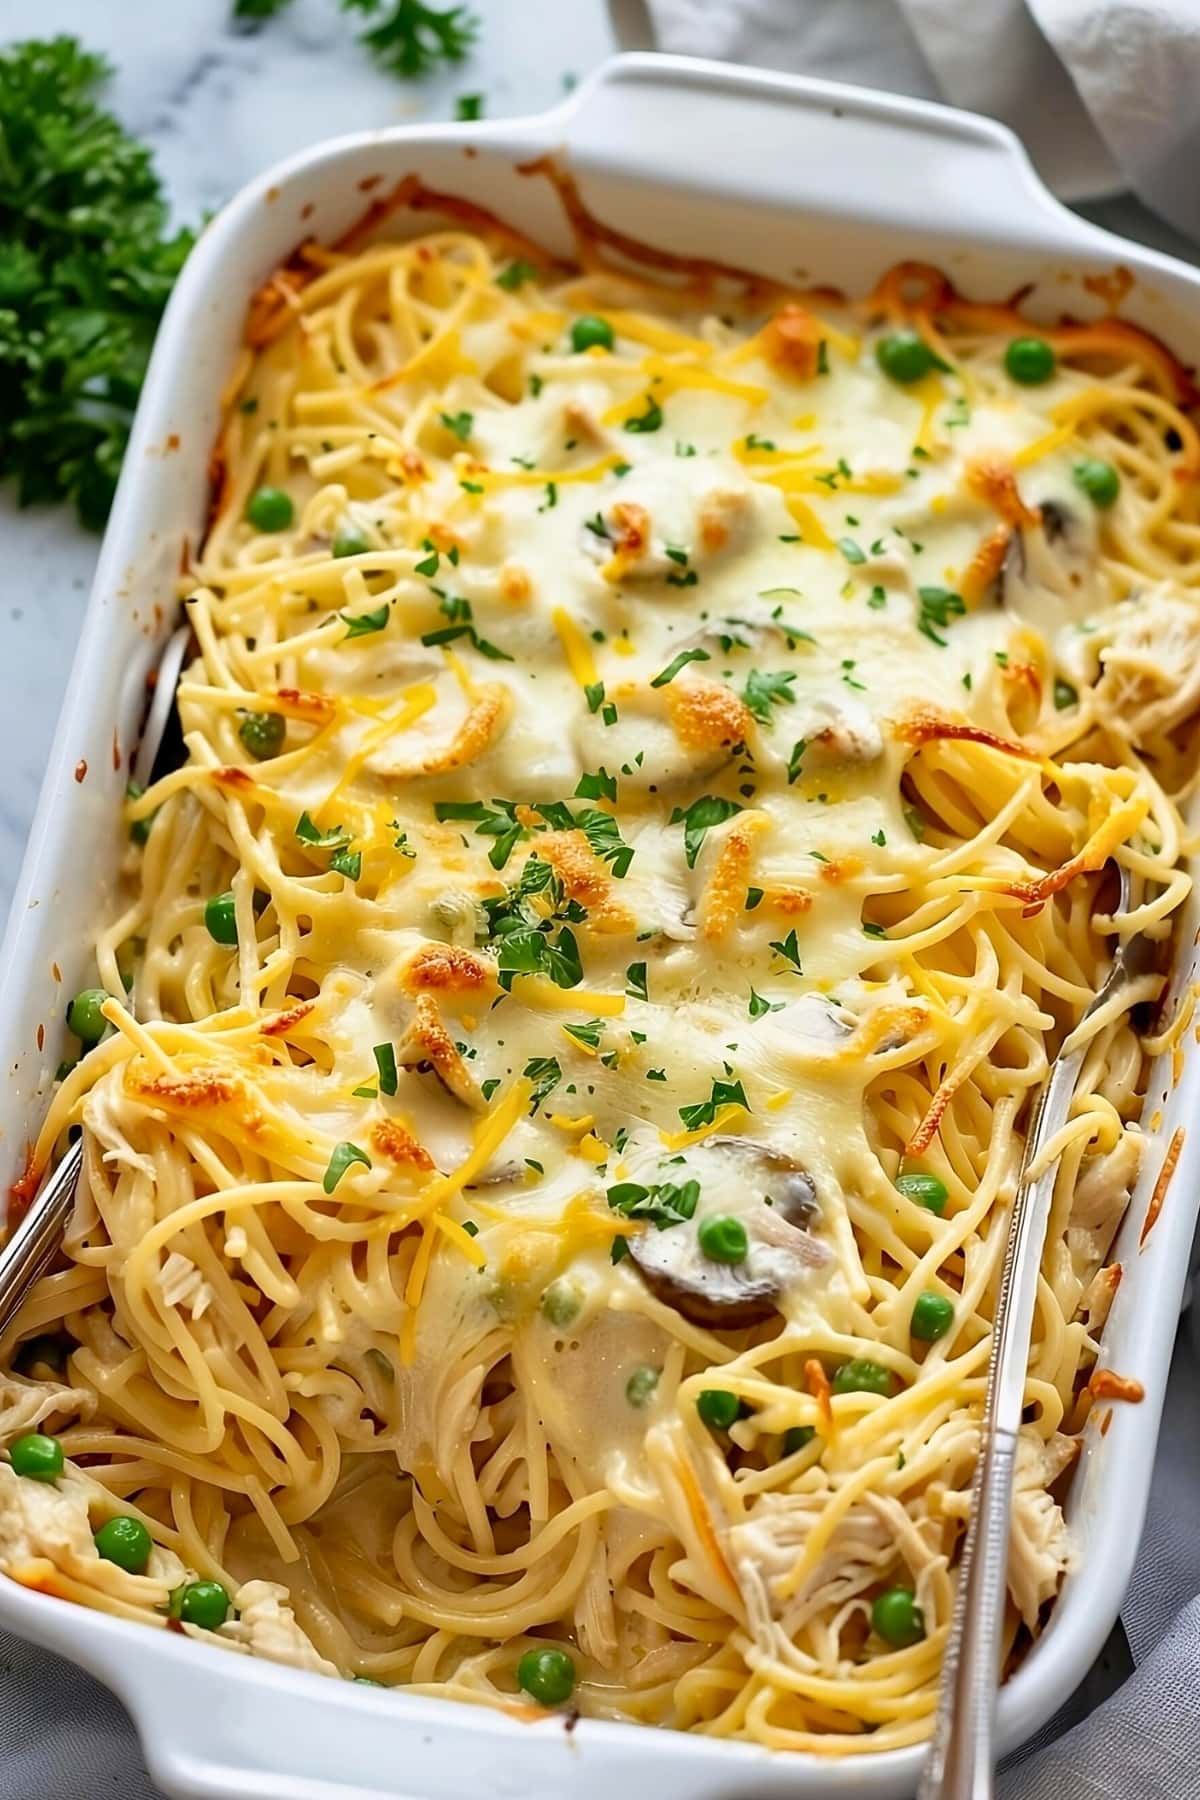 Baked pasta in creamy and cheesy sauce in a casserole dish.